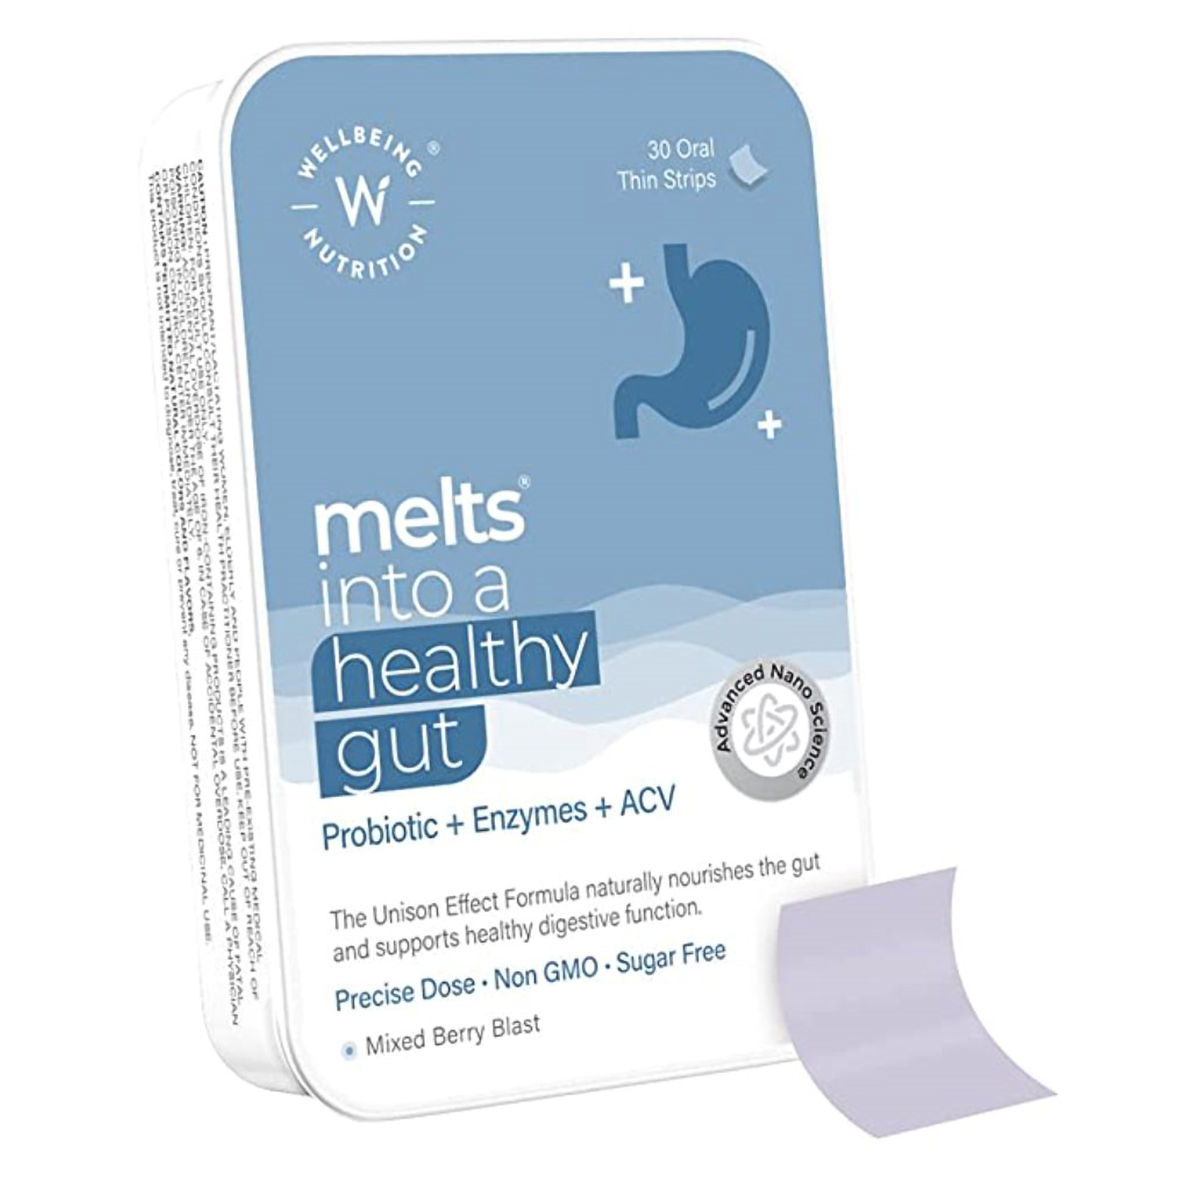 Buy Wellbeing Nutrition Melts Into A Healthy Gut Sugar Free, 30 Strips Online